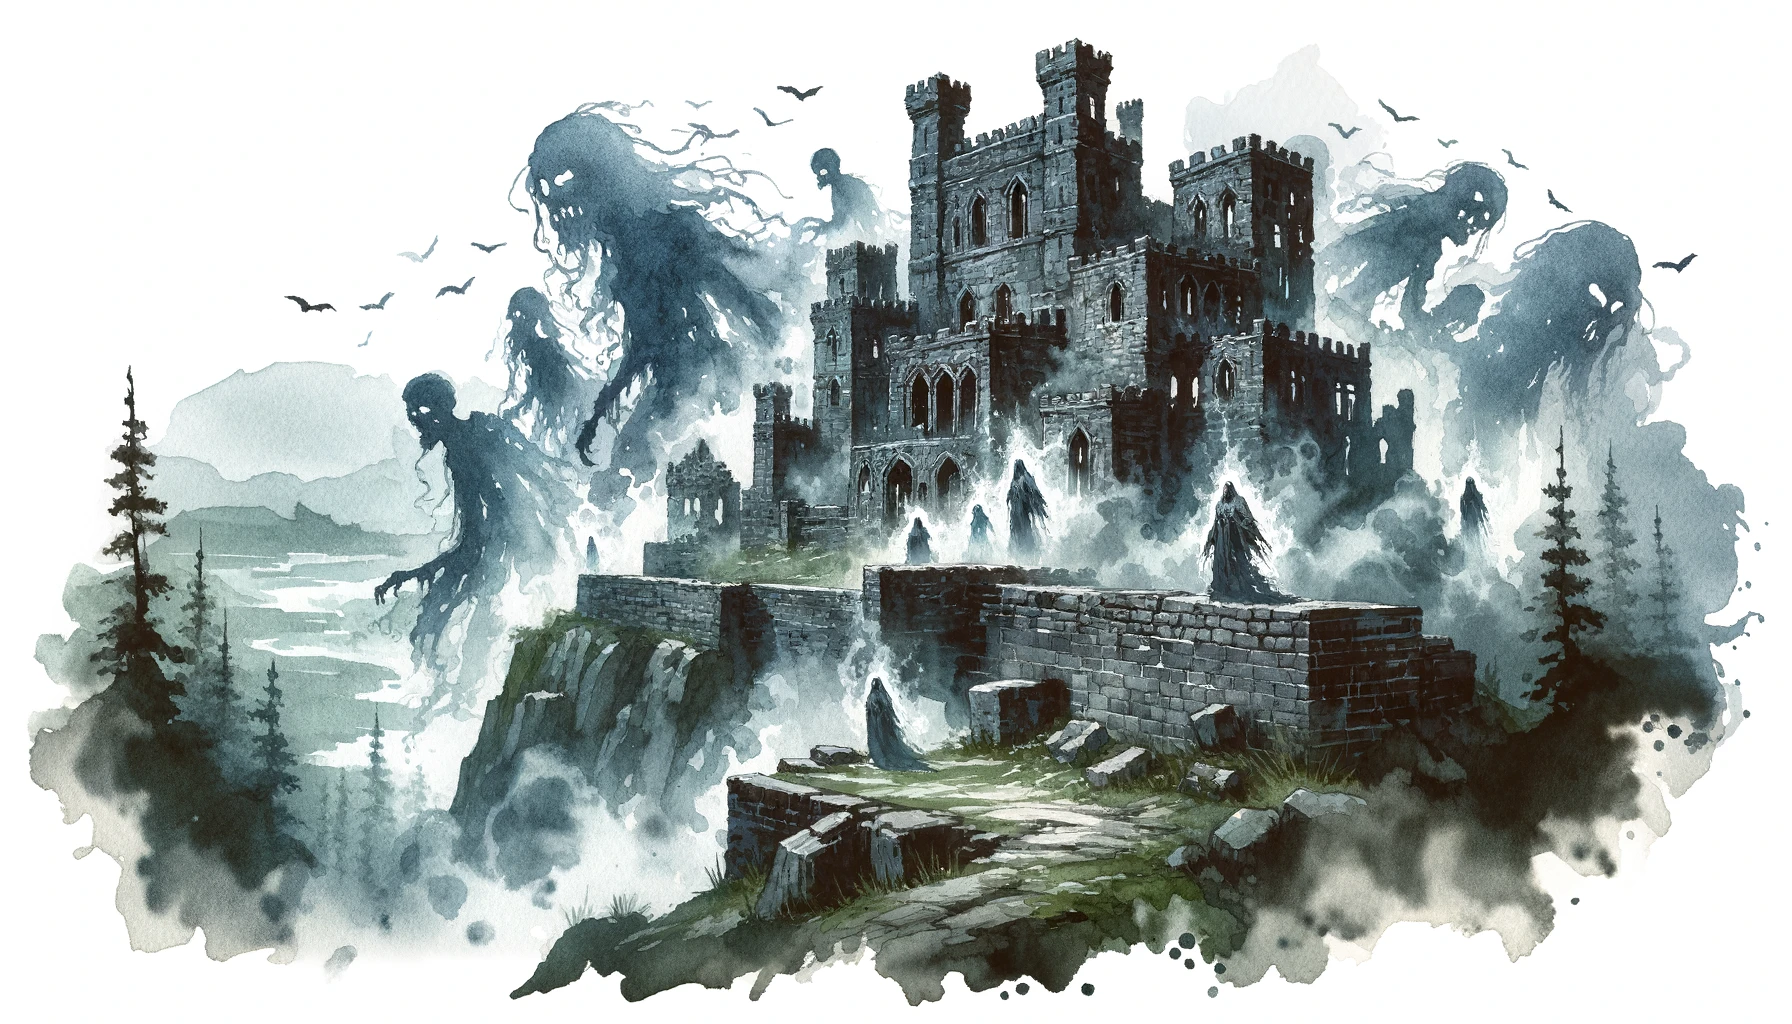 The ruins of an old keep on a hilltop, haunted by ghostly figures and surrounded by dense fog.